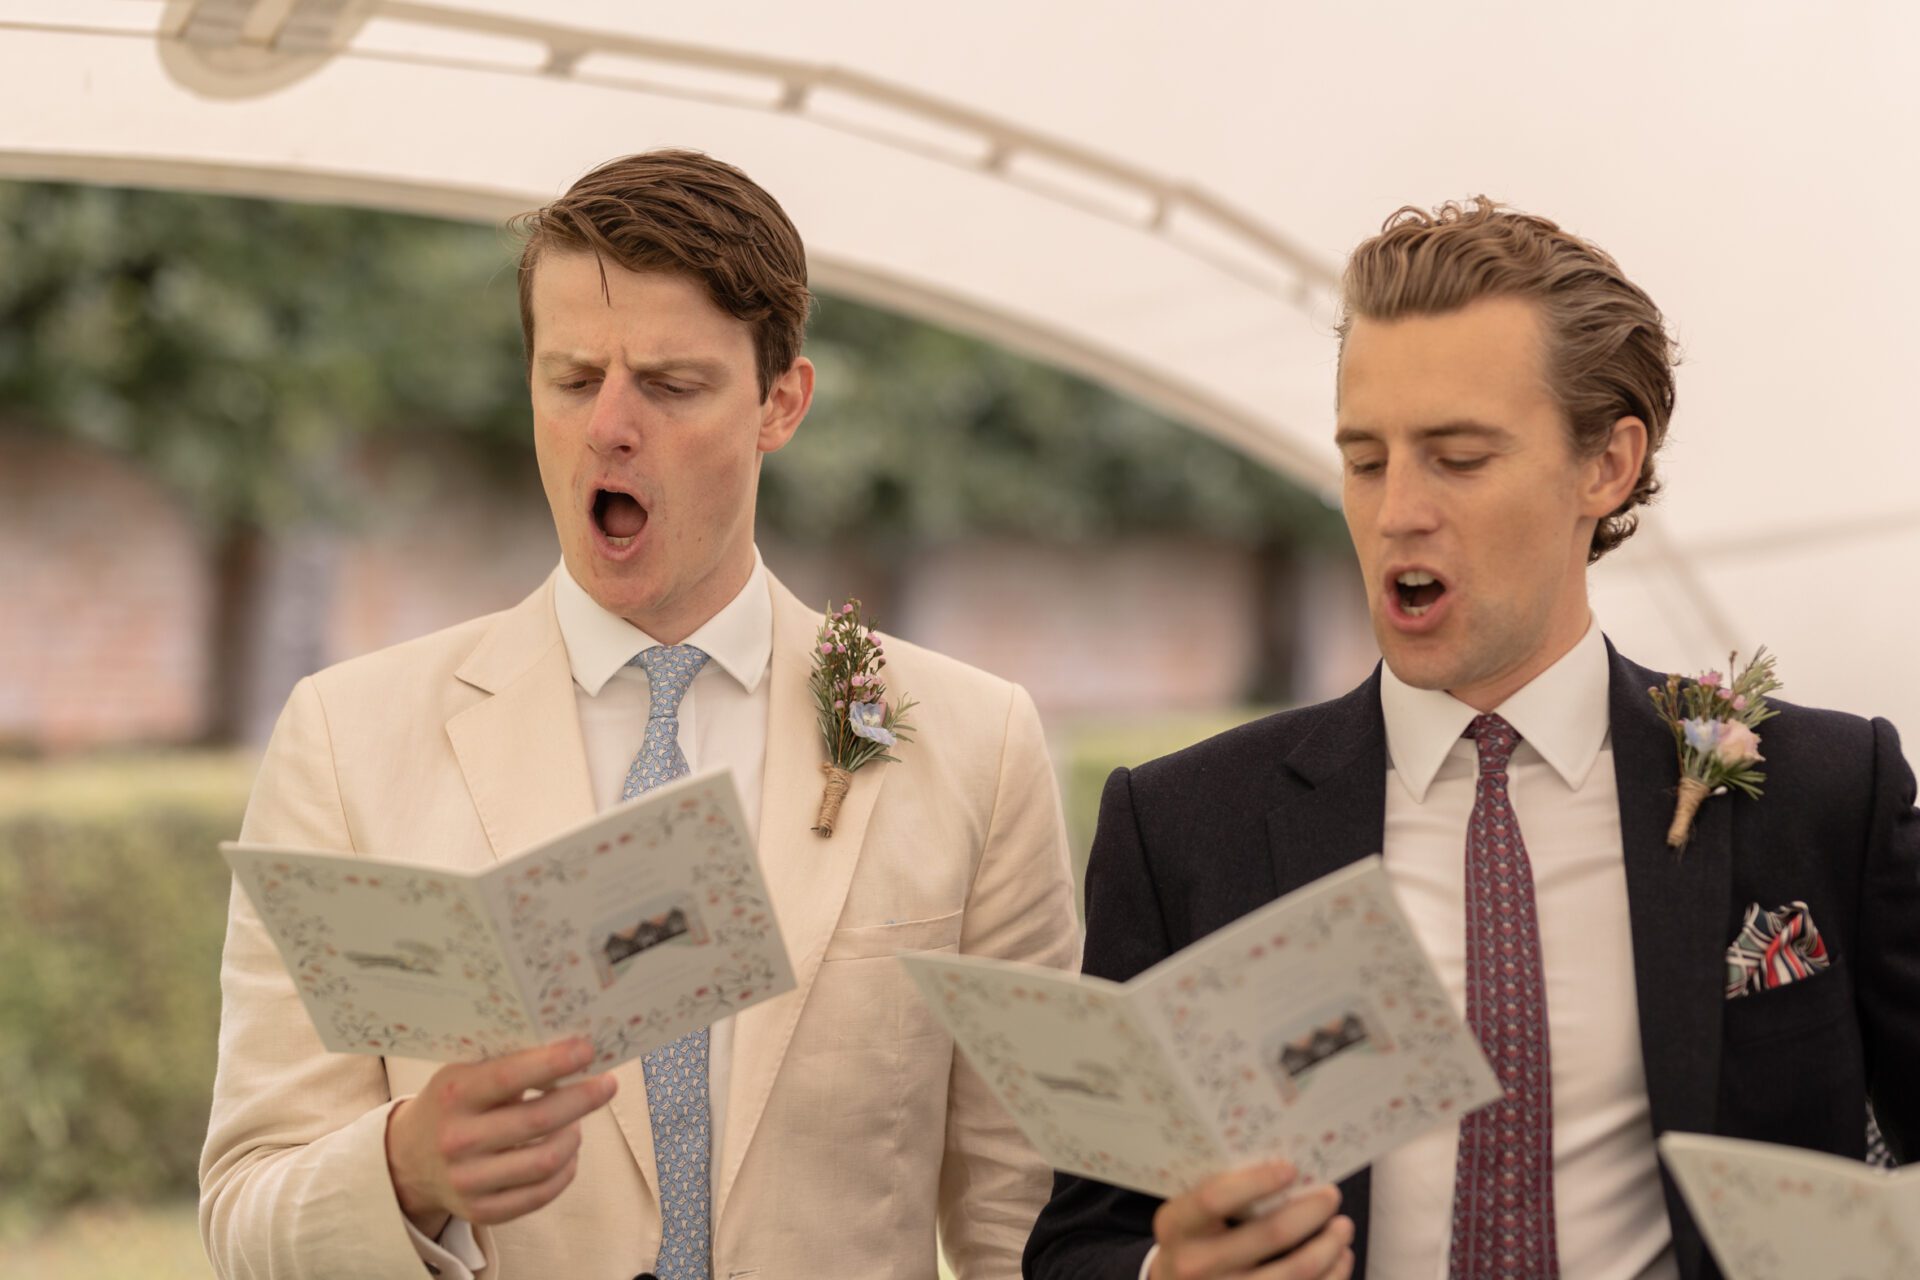 The wedding guests sing during the wedding ceremony